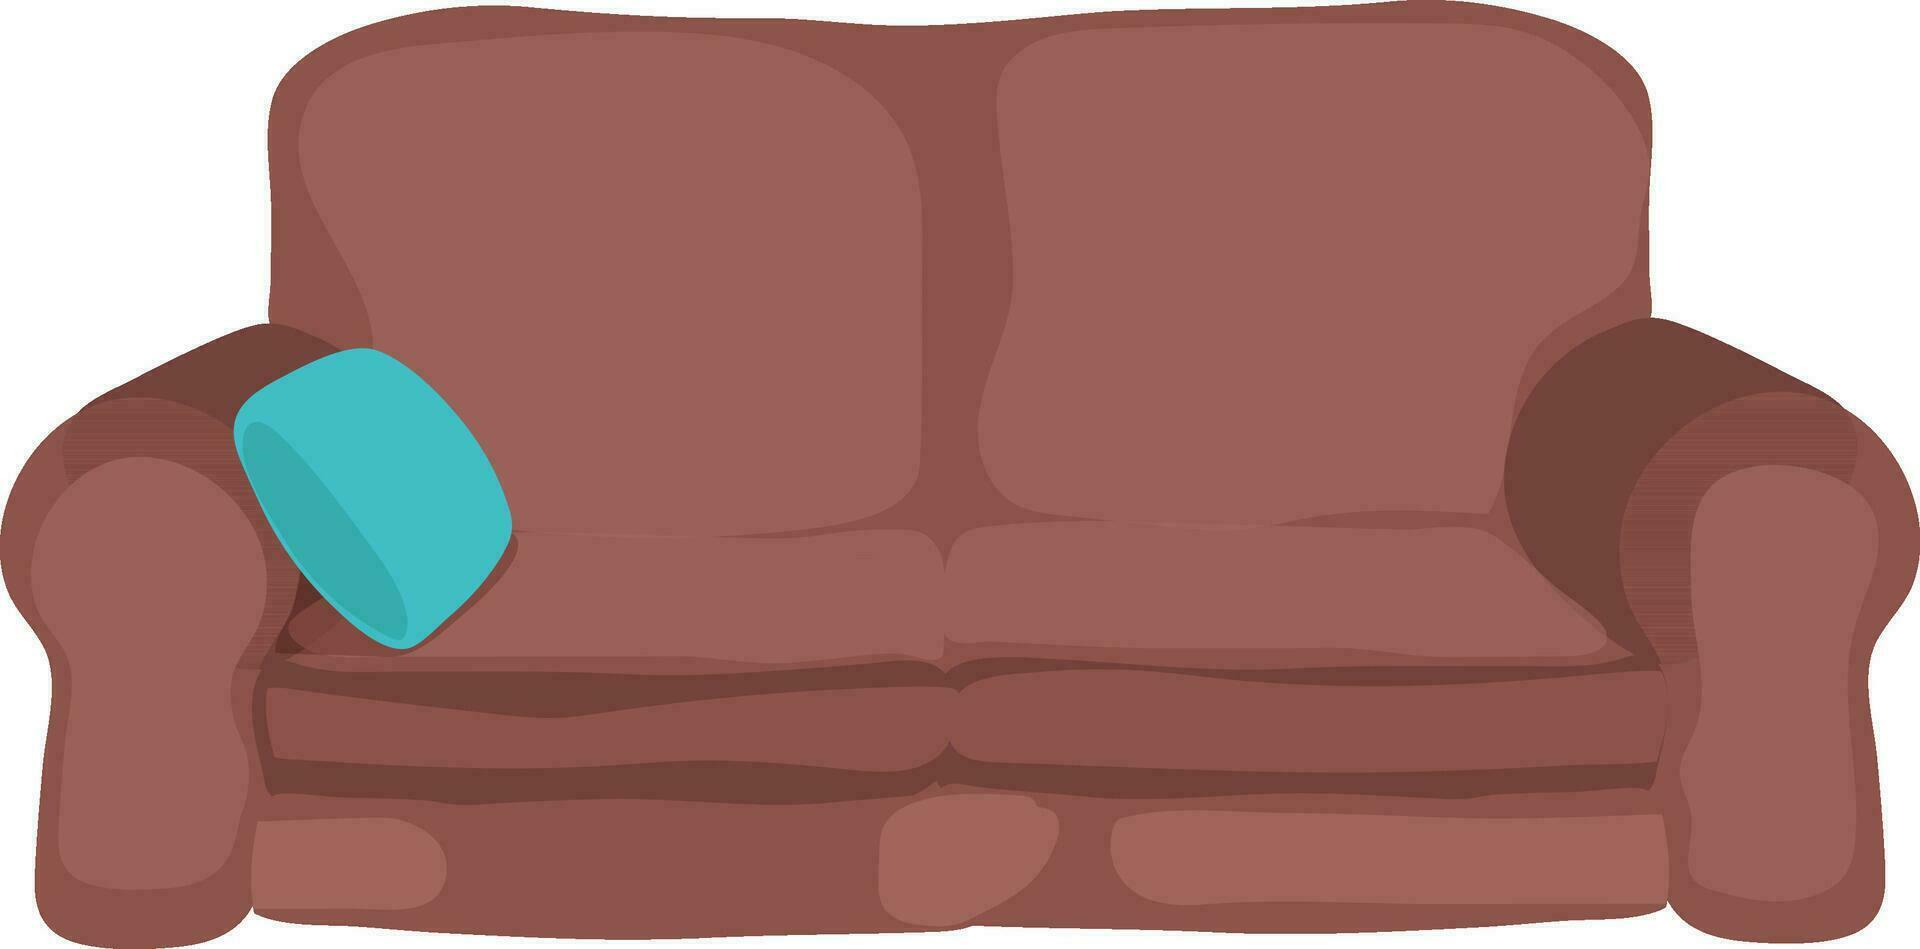 Flat illustration of sofa with pillow. vector